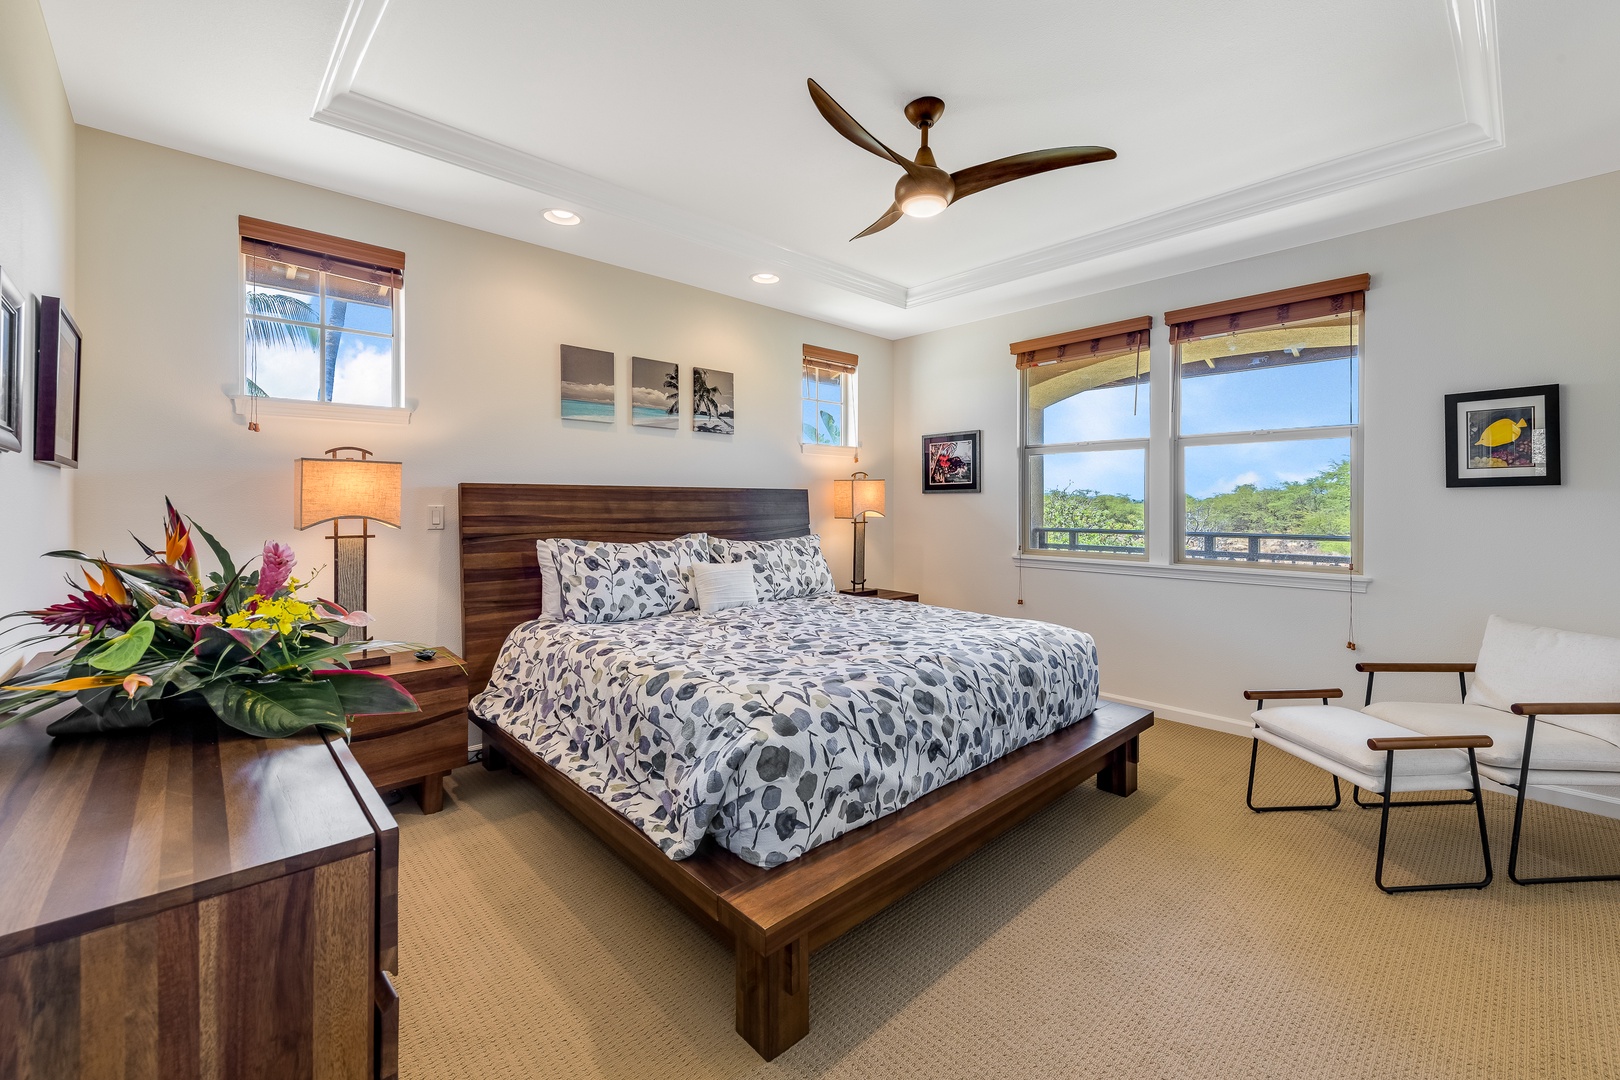 Kamuela Vacation Rentals, Mauna Lani Fairways #603 - The primary suite boasts a plush king bed with views of nature